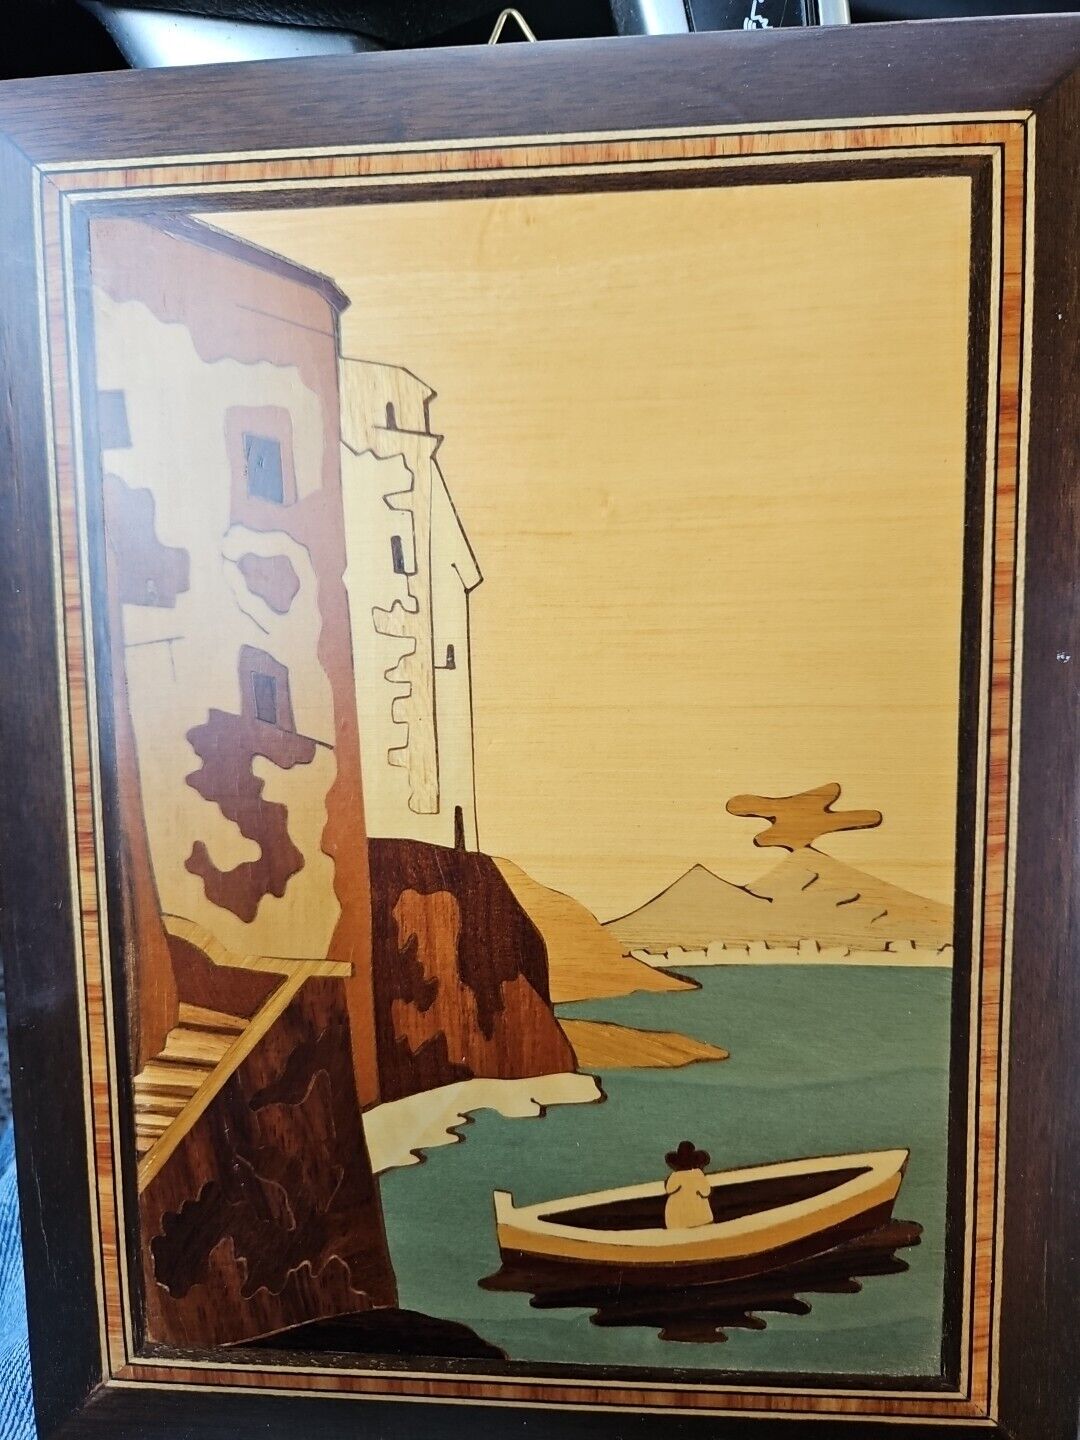 Vintage Inlaid Wood Picture Notturno Intarsio - Sorrento Italy